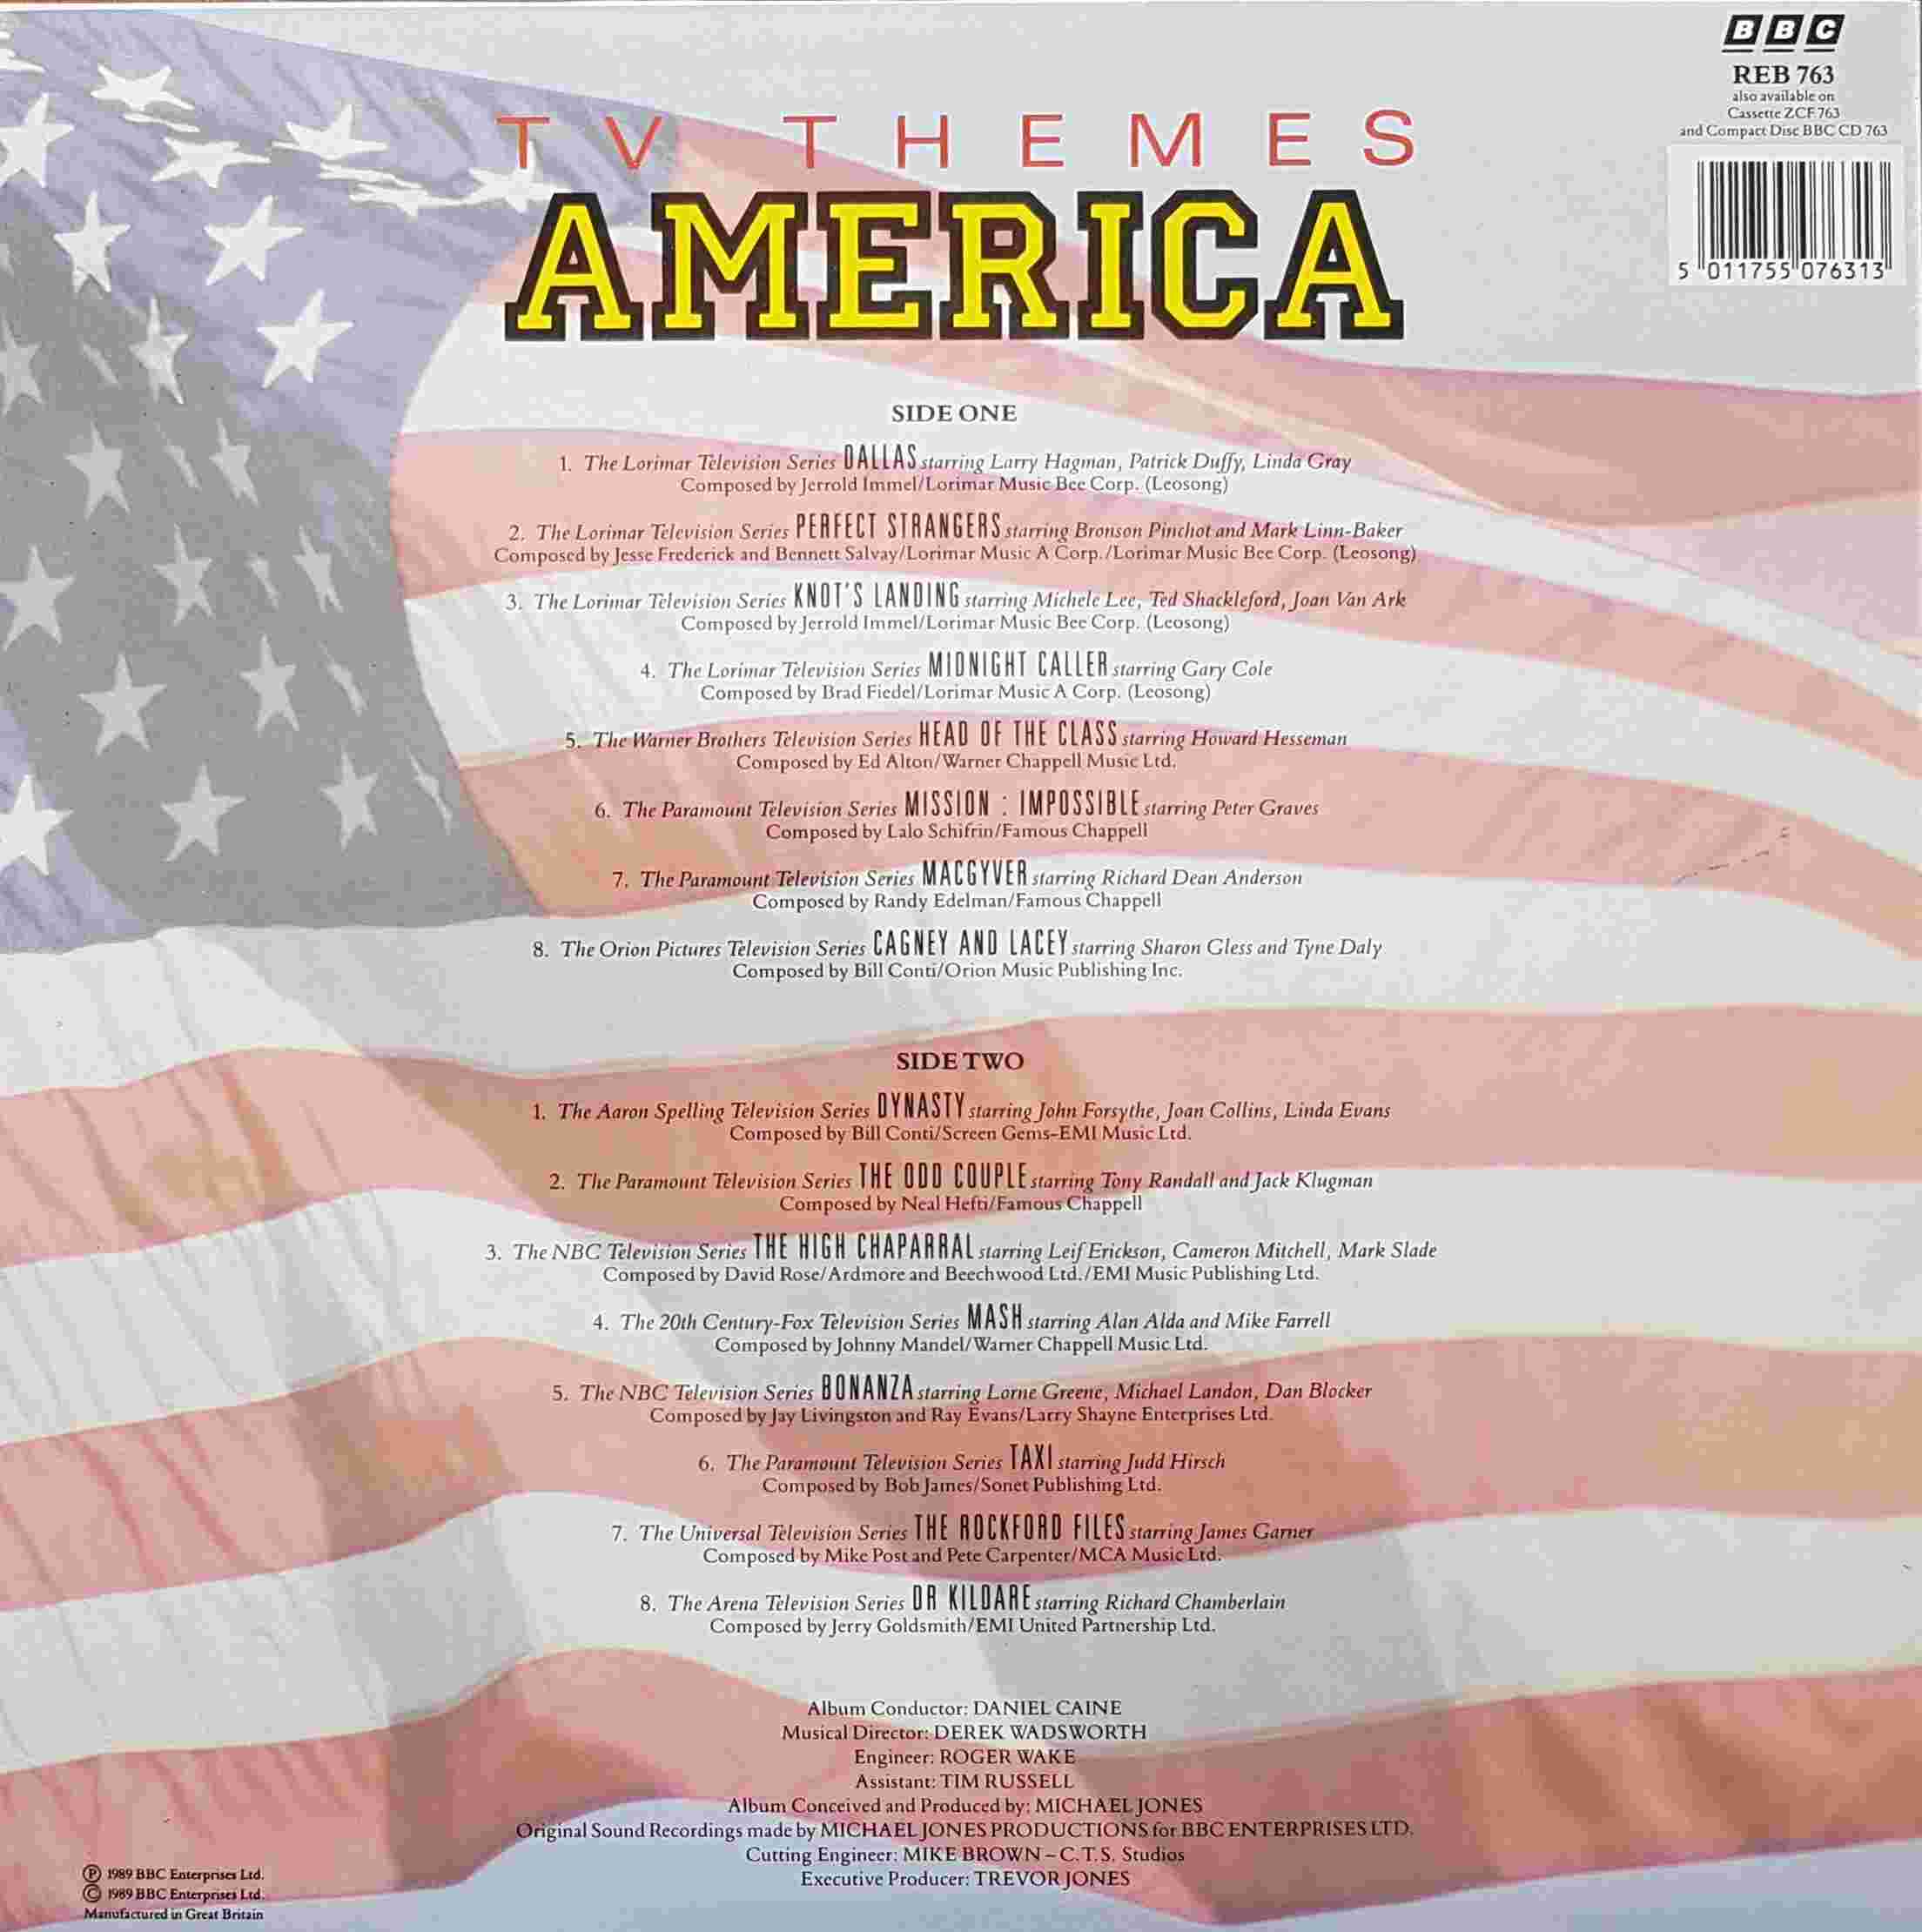 Picture of REB 763 TV themes - America by artist Various from the BBC records and Tapes library